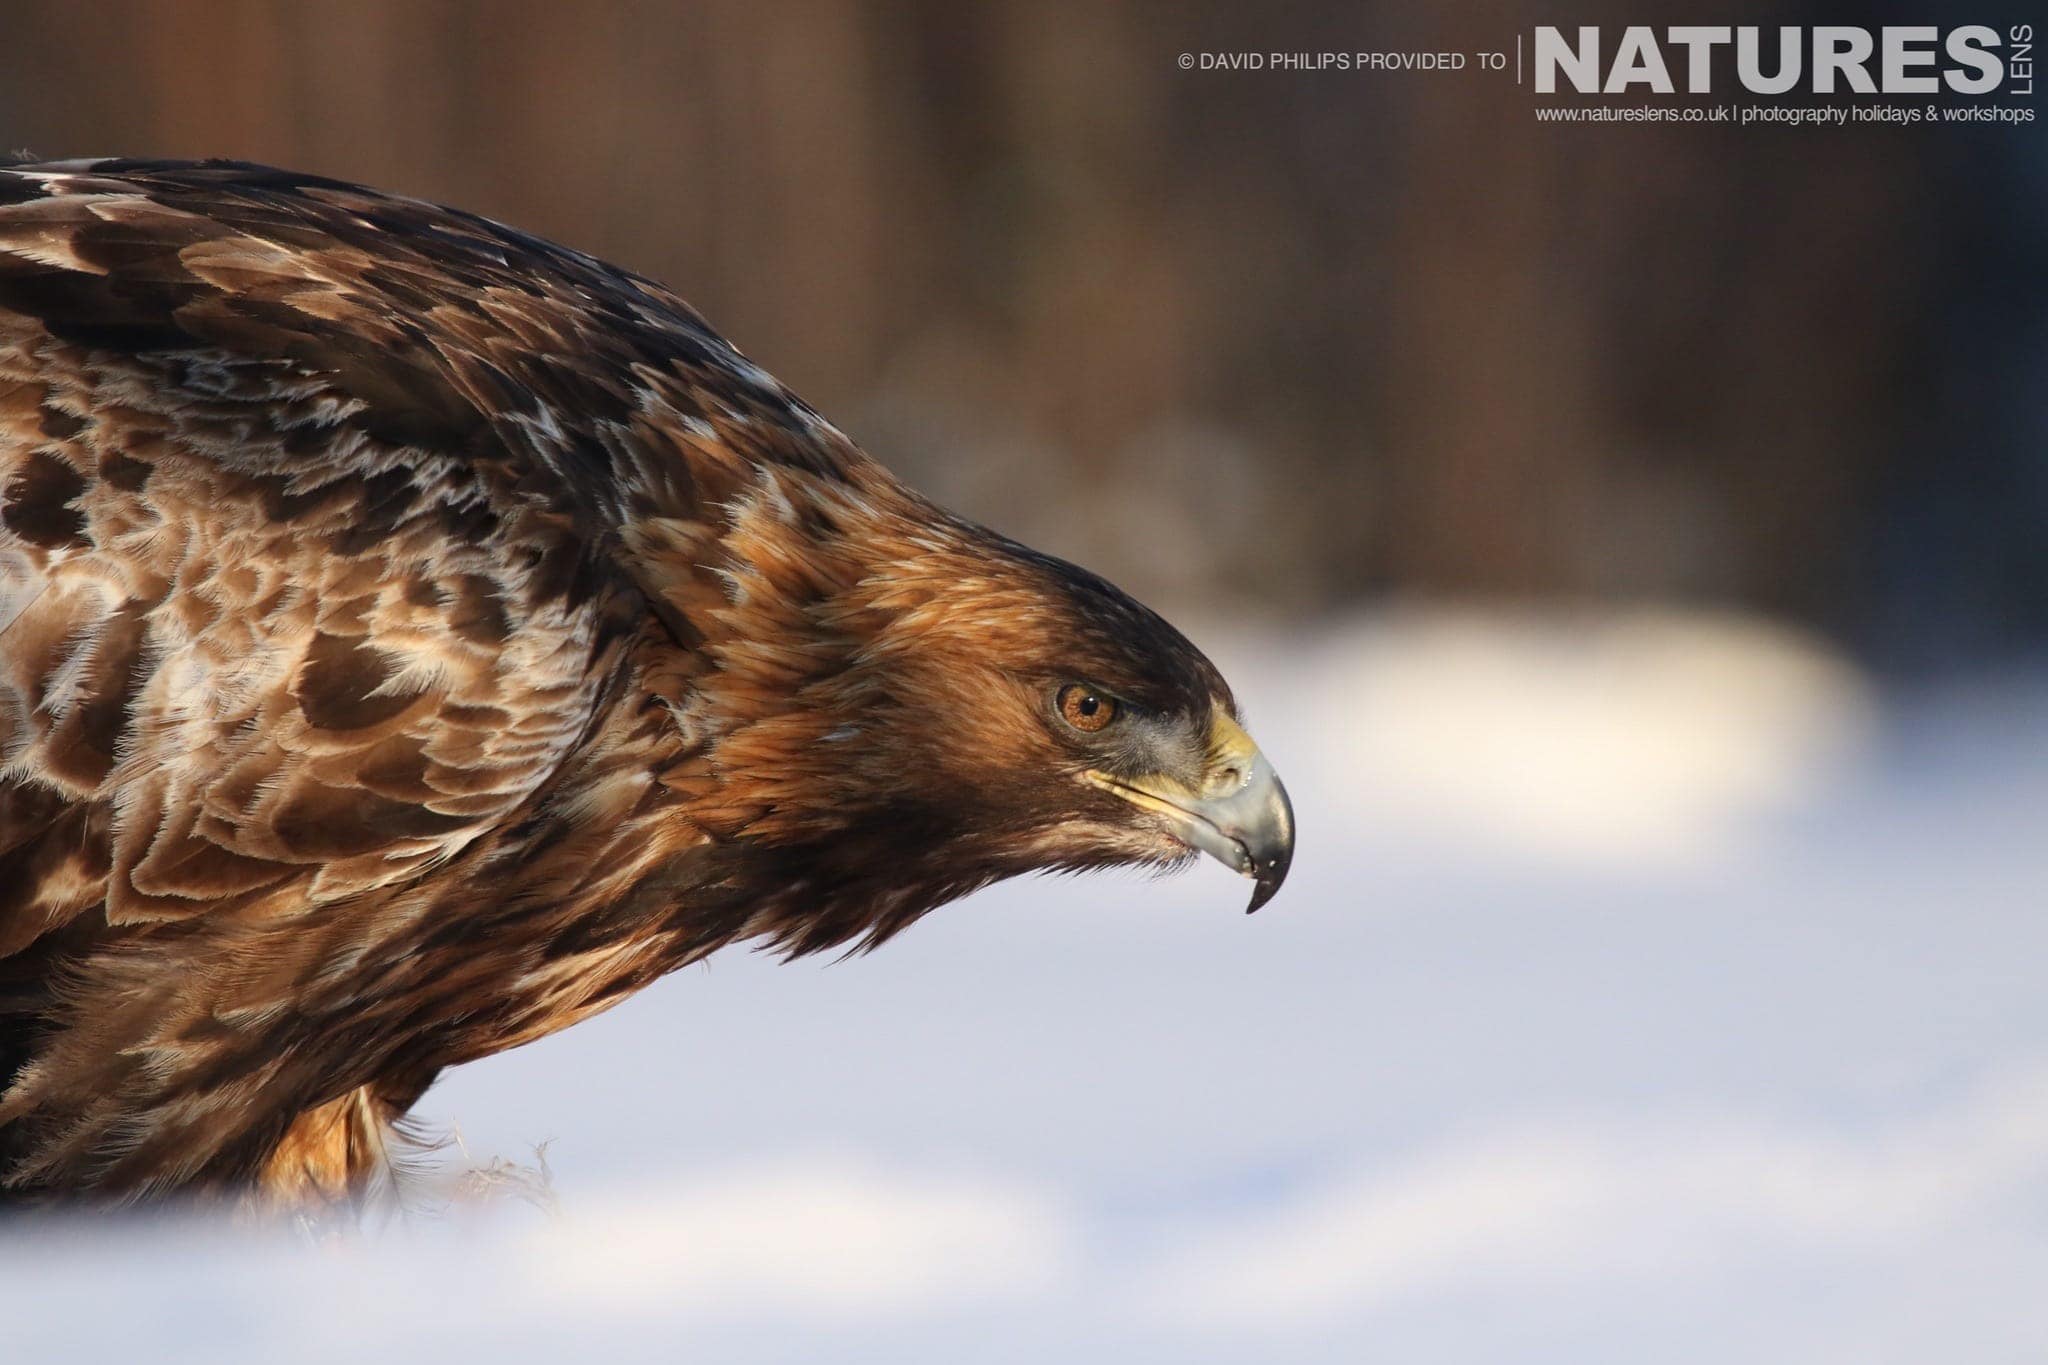 A Close Up Of One Of The Golden Eagles Feeding In The Snow Image Captured During The Natureslens Golden Eagles Of The Swedish Winter Photography Holiday